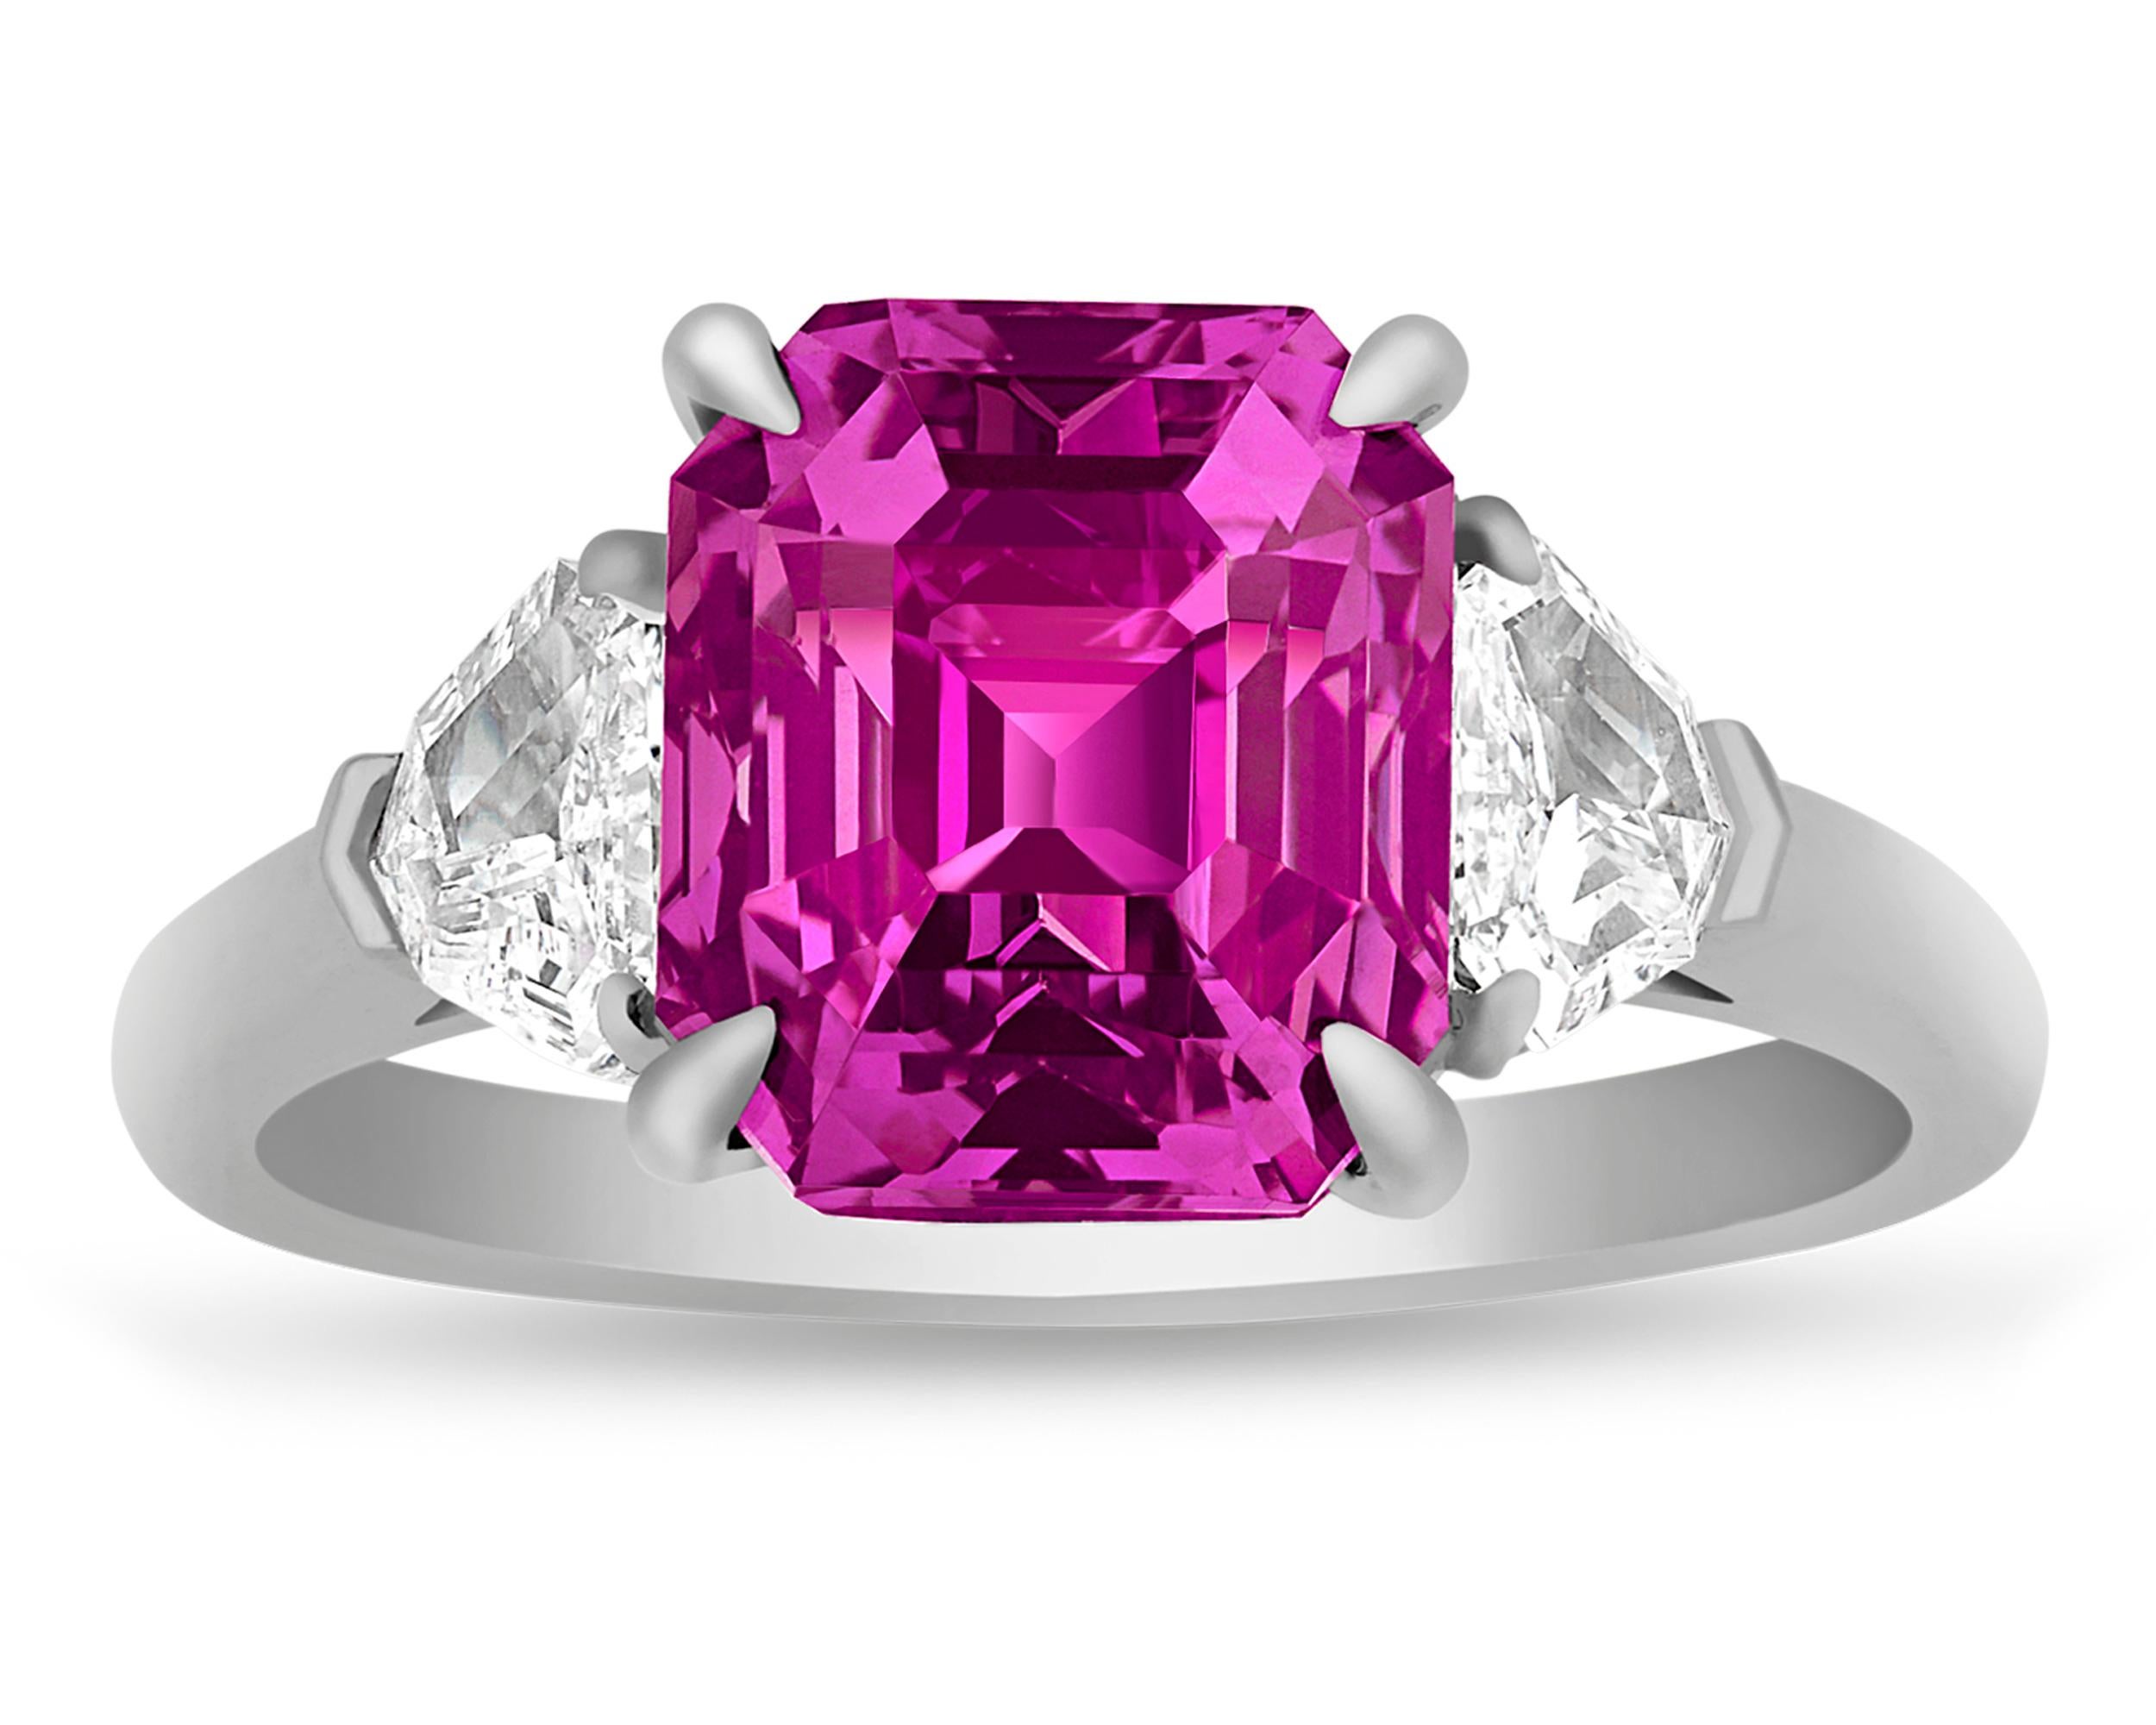 Emerald Cut Pink-Purple Sapphire Ring, 5.02 Carats For Sale